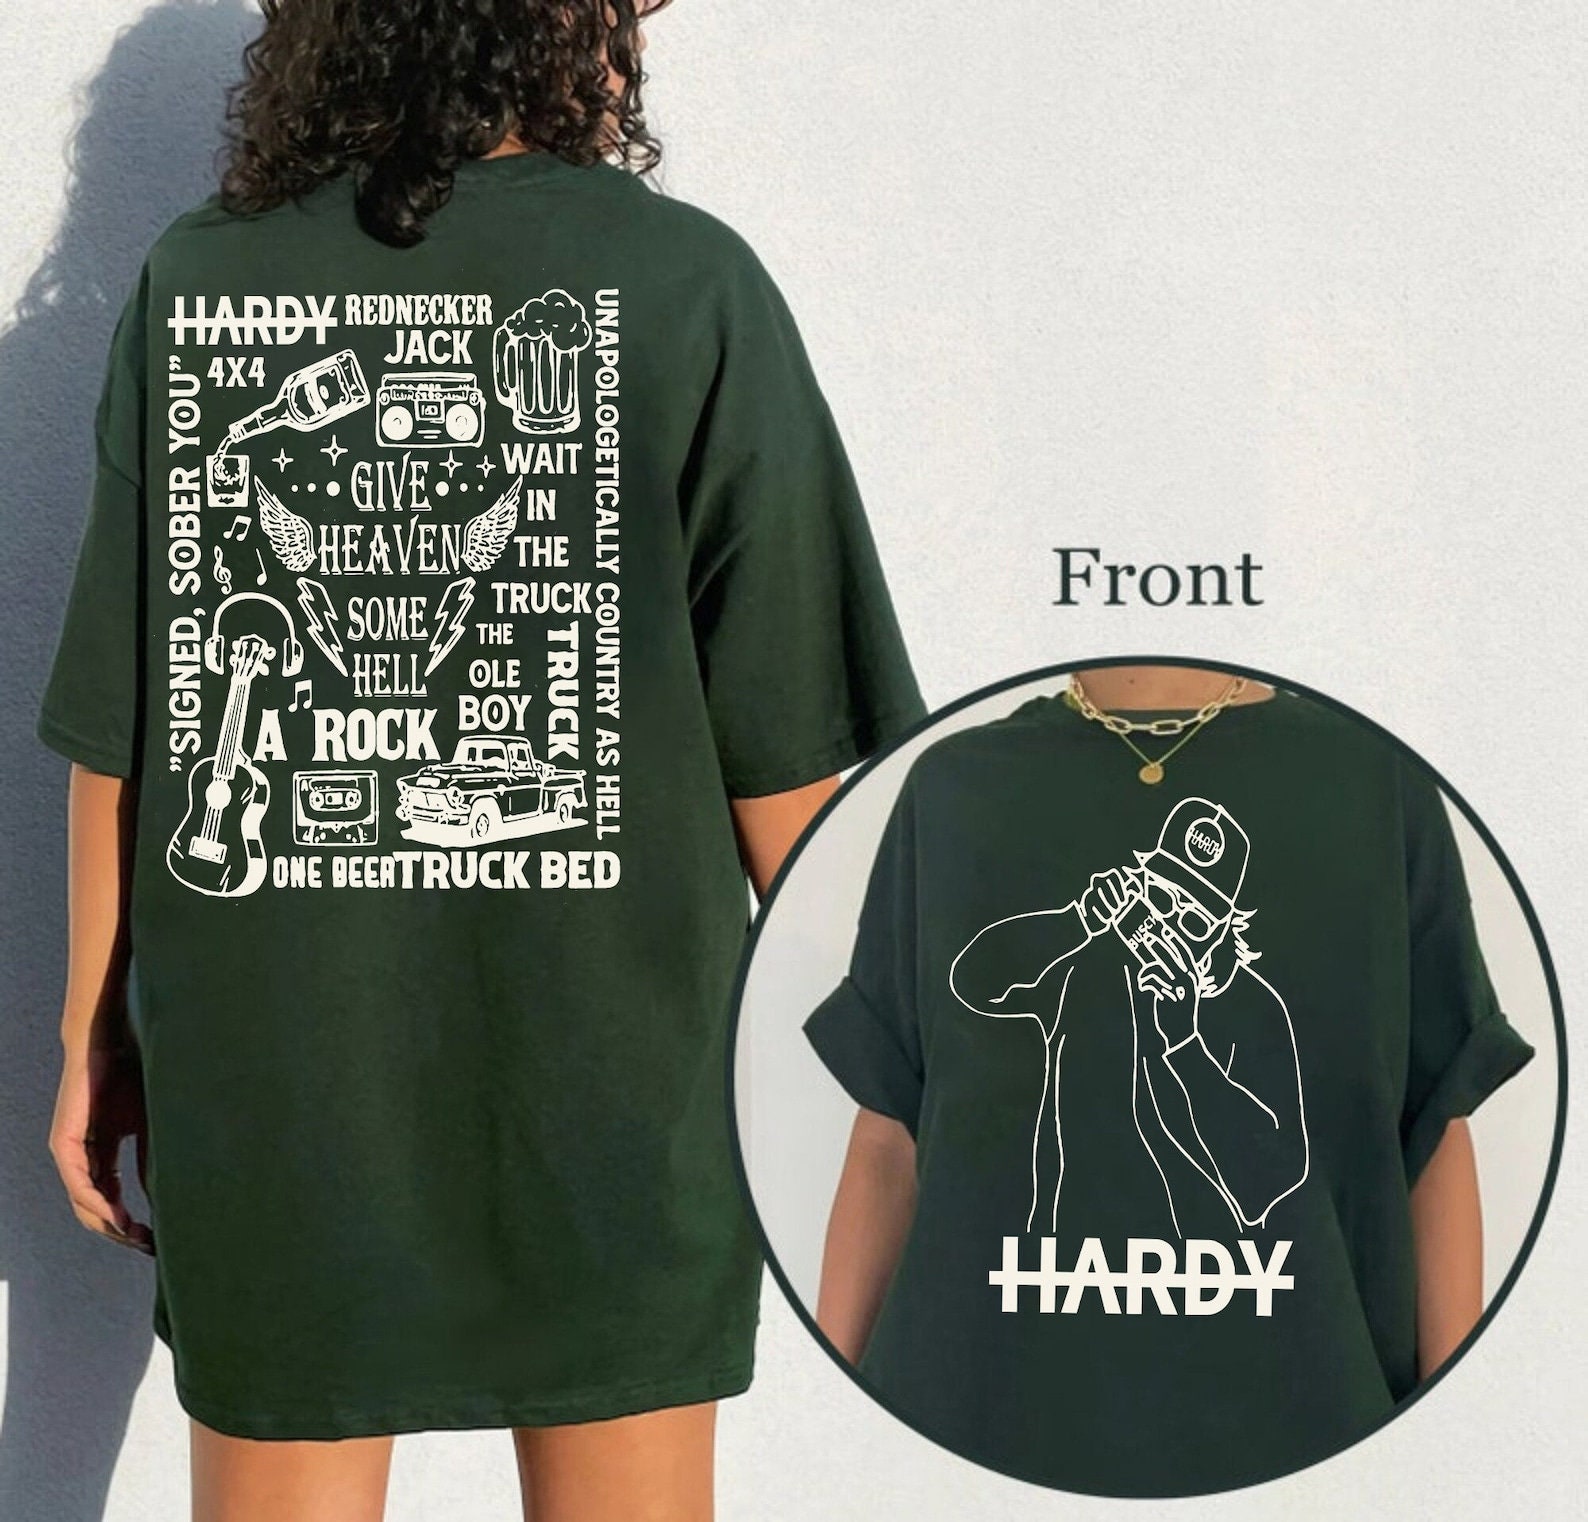 Hadry Gift fans 2side Tshirt, Hadry Shirt, Country Music Shirts, Country Concert Hardyy  Double Sided T-Shirt